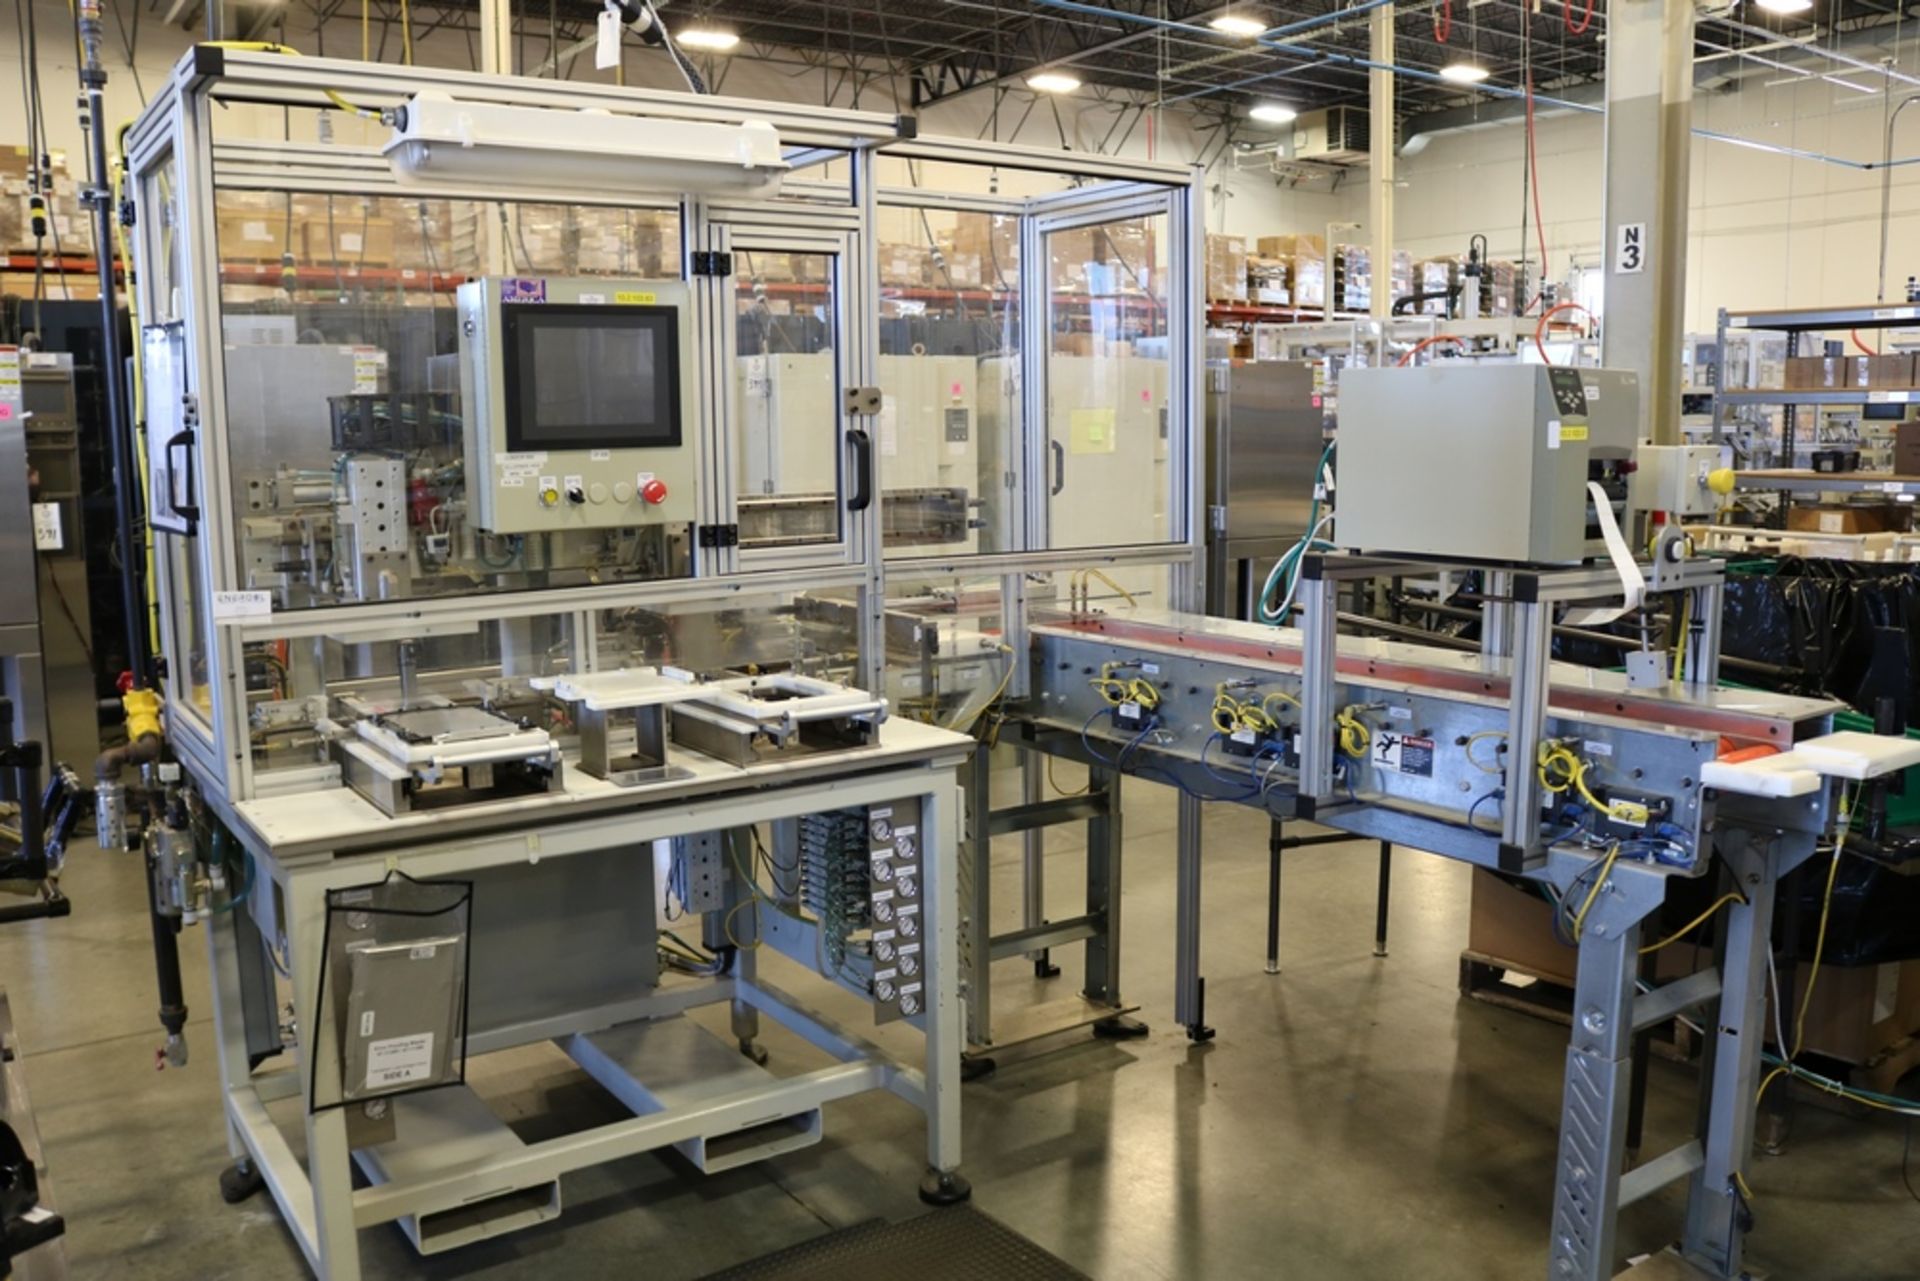 3 Station Automated Module Assembly Line Built by Pro Tech Machine for Enerdel Module Assembly - Image 11 of 48